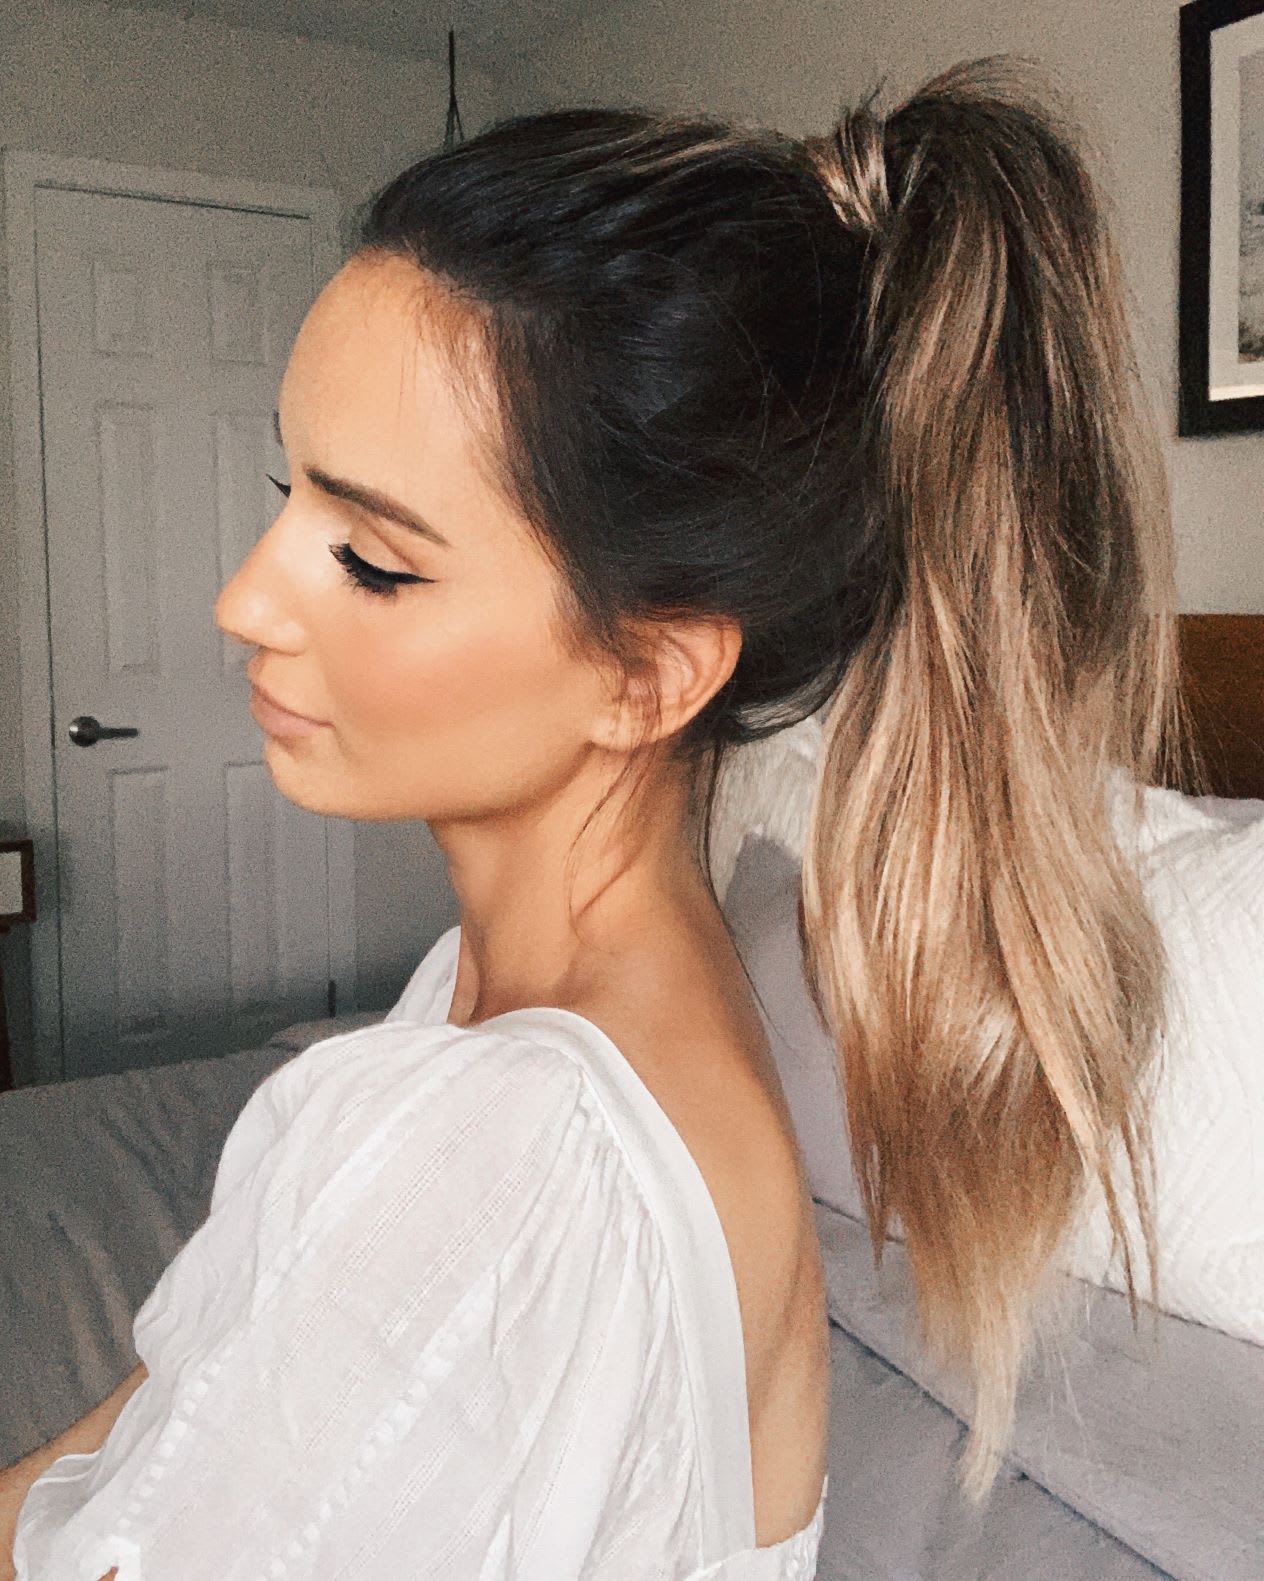 How to Dress Up a Ponytail: 5 Stylish Tricks That are Ridiculously Easy -   Fashion Blog